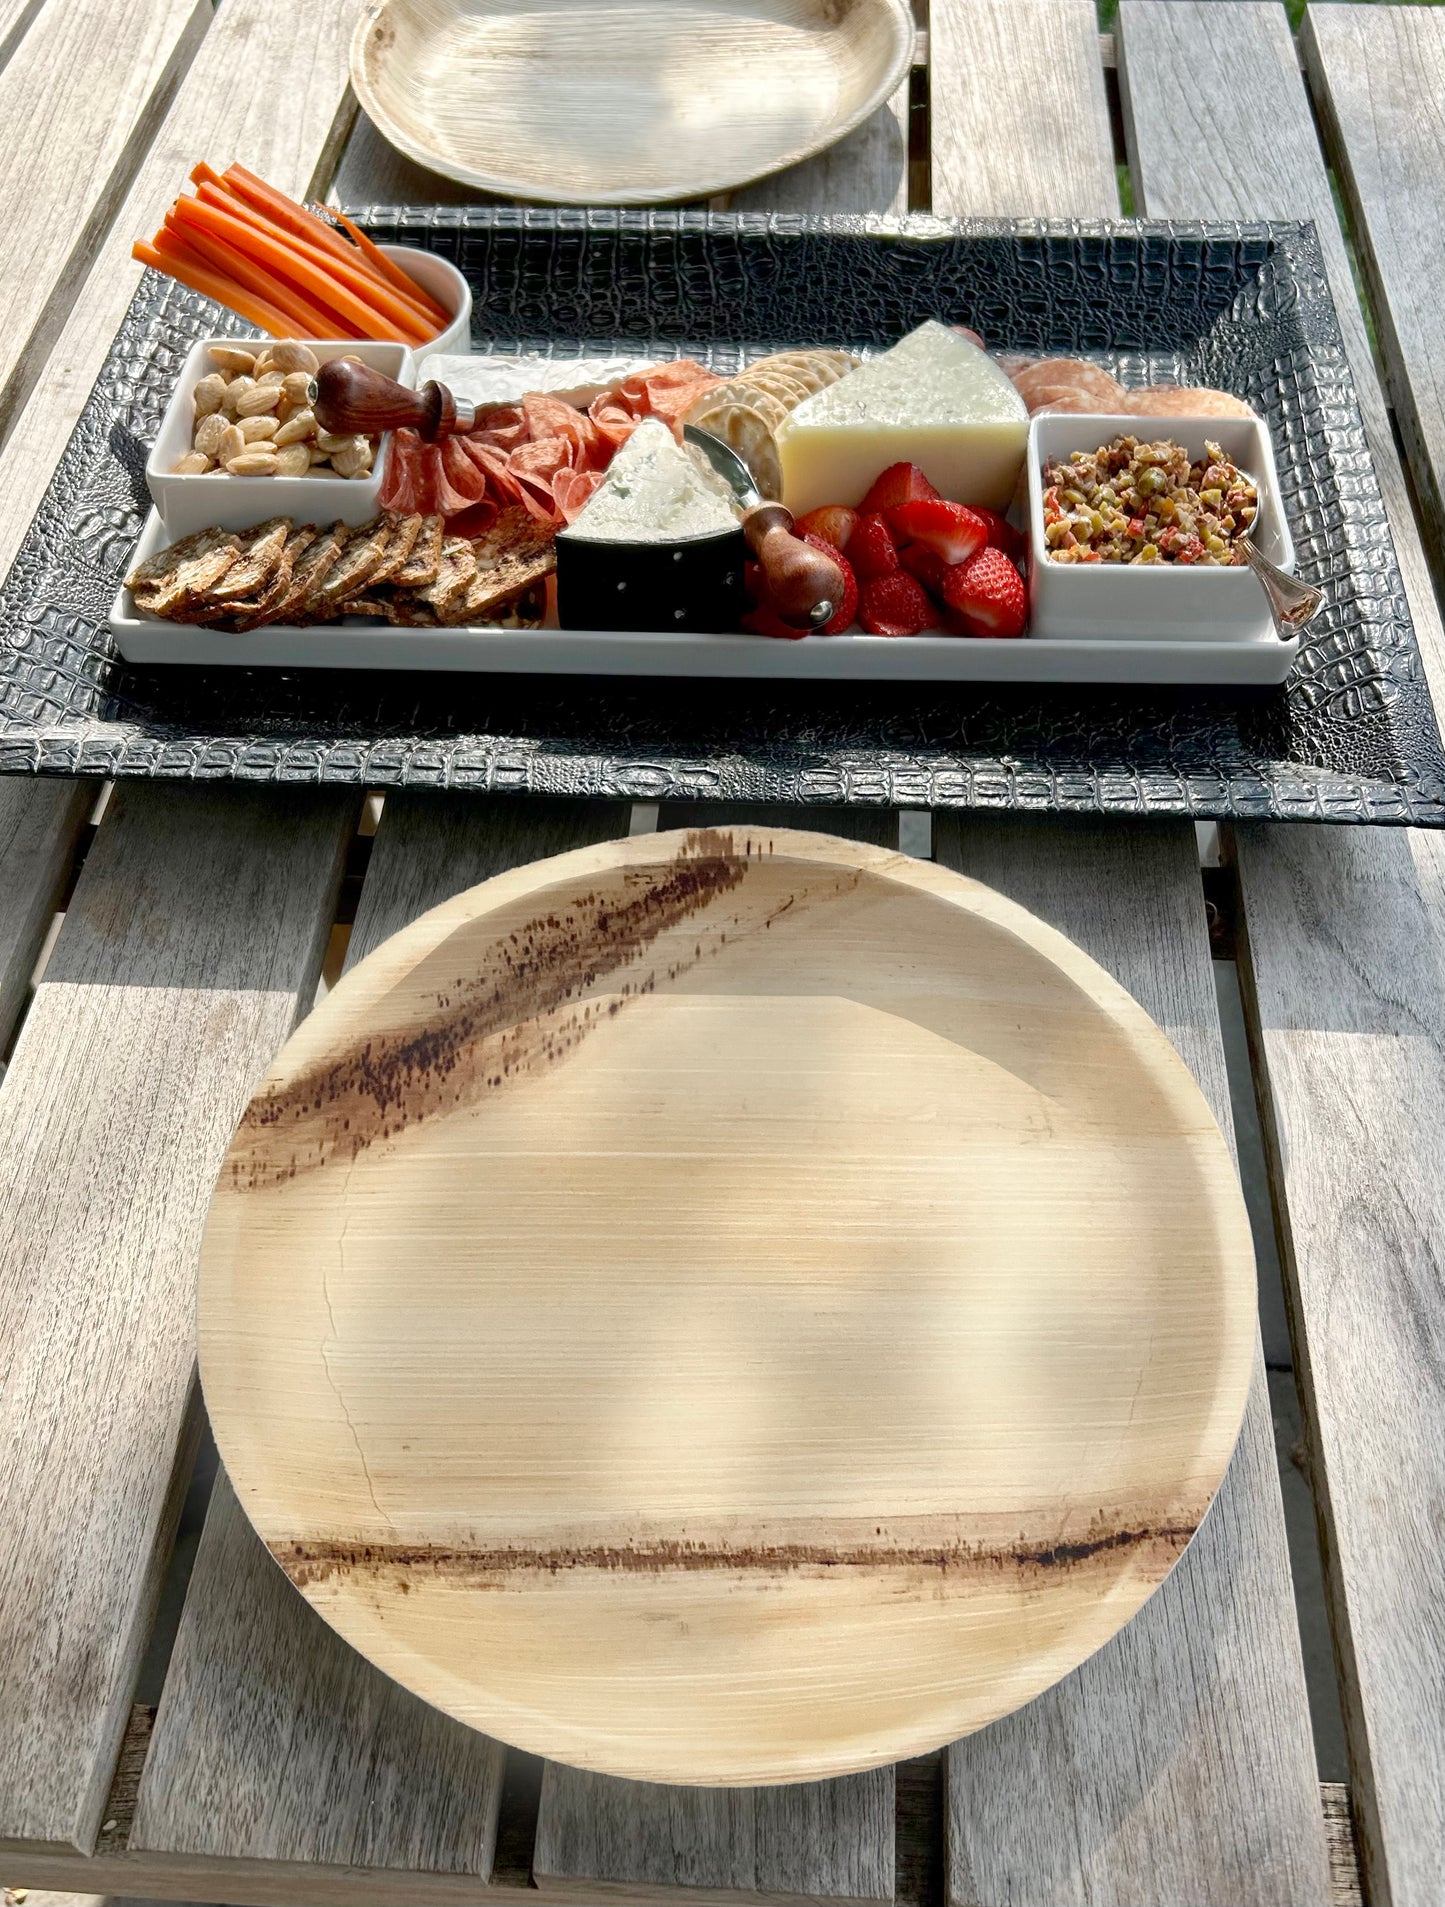 NEATtable compostable palm leaf plate at an outdoor dinner.